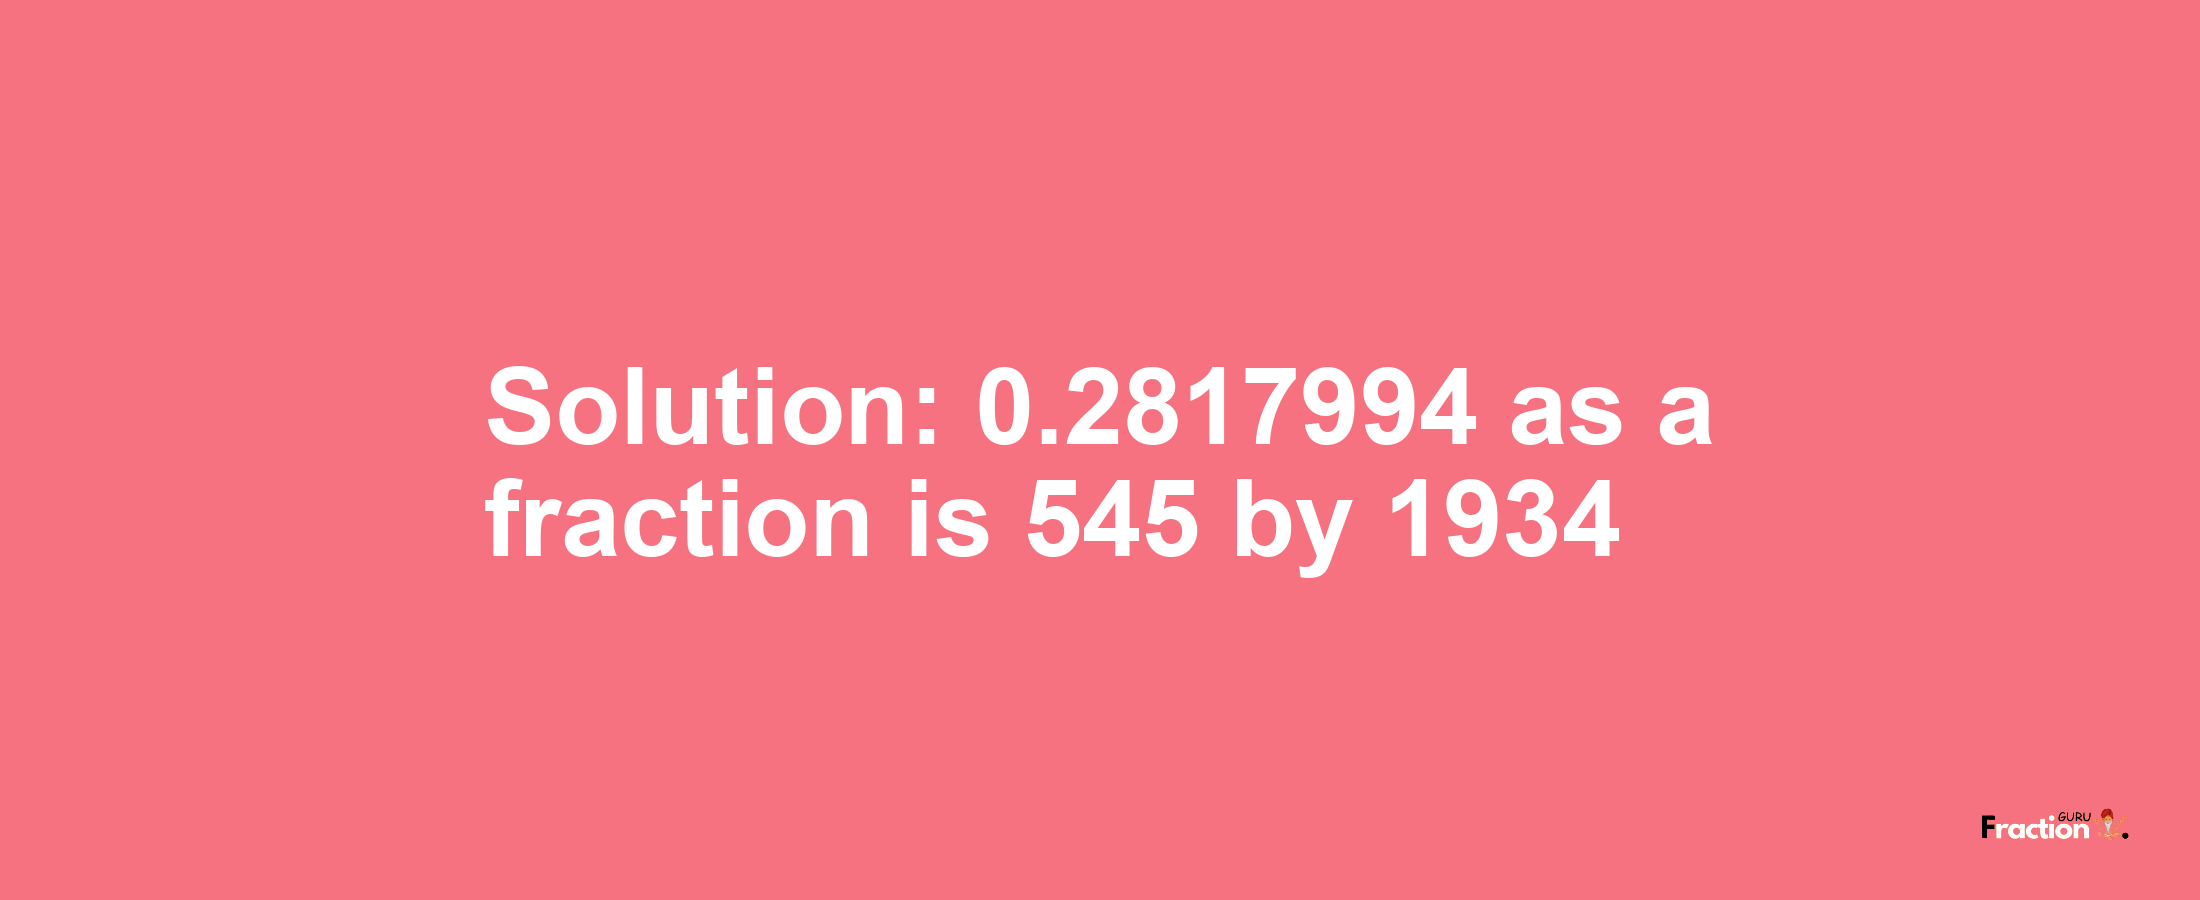 Solution:0.2817994 as a fraction is 545/1934